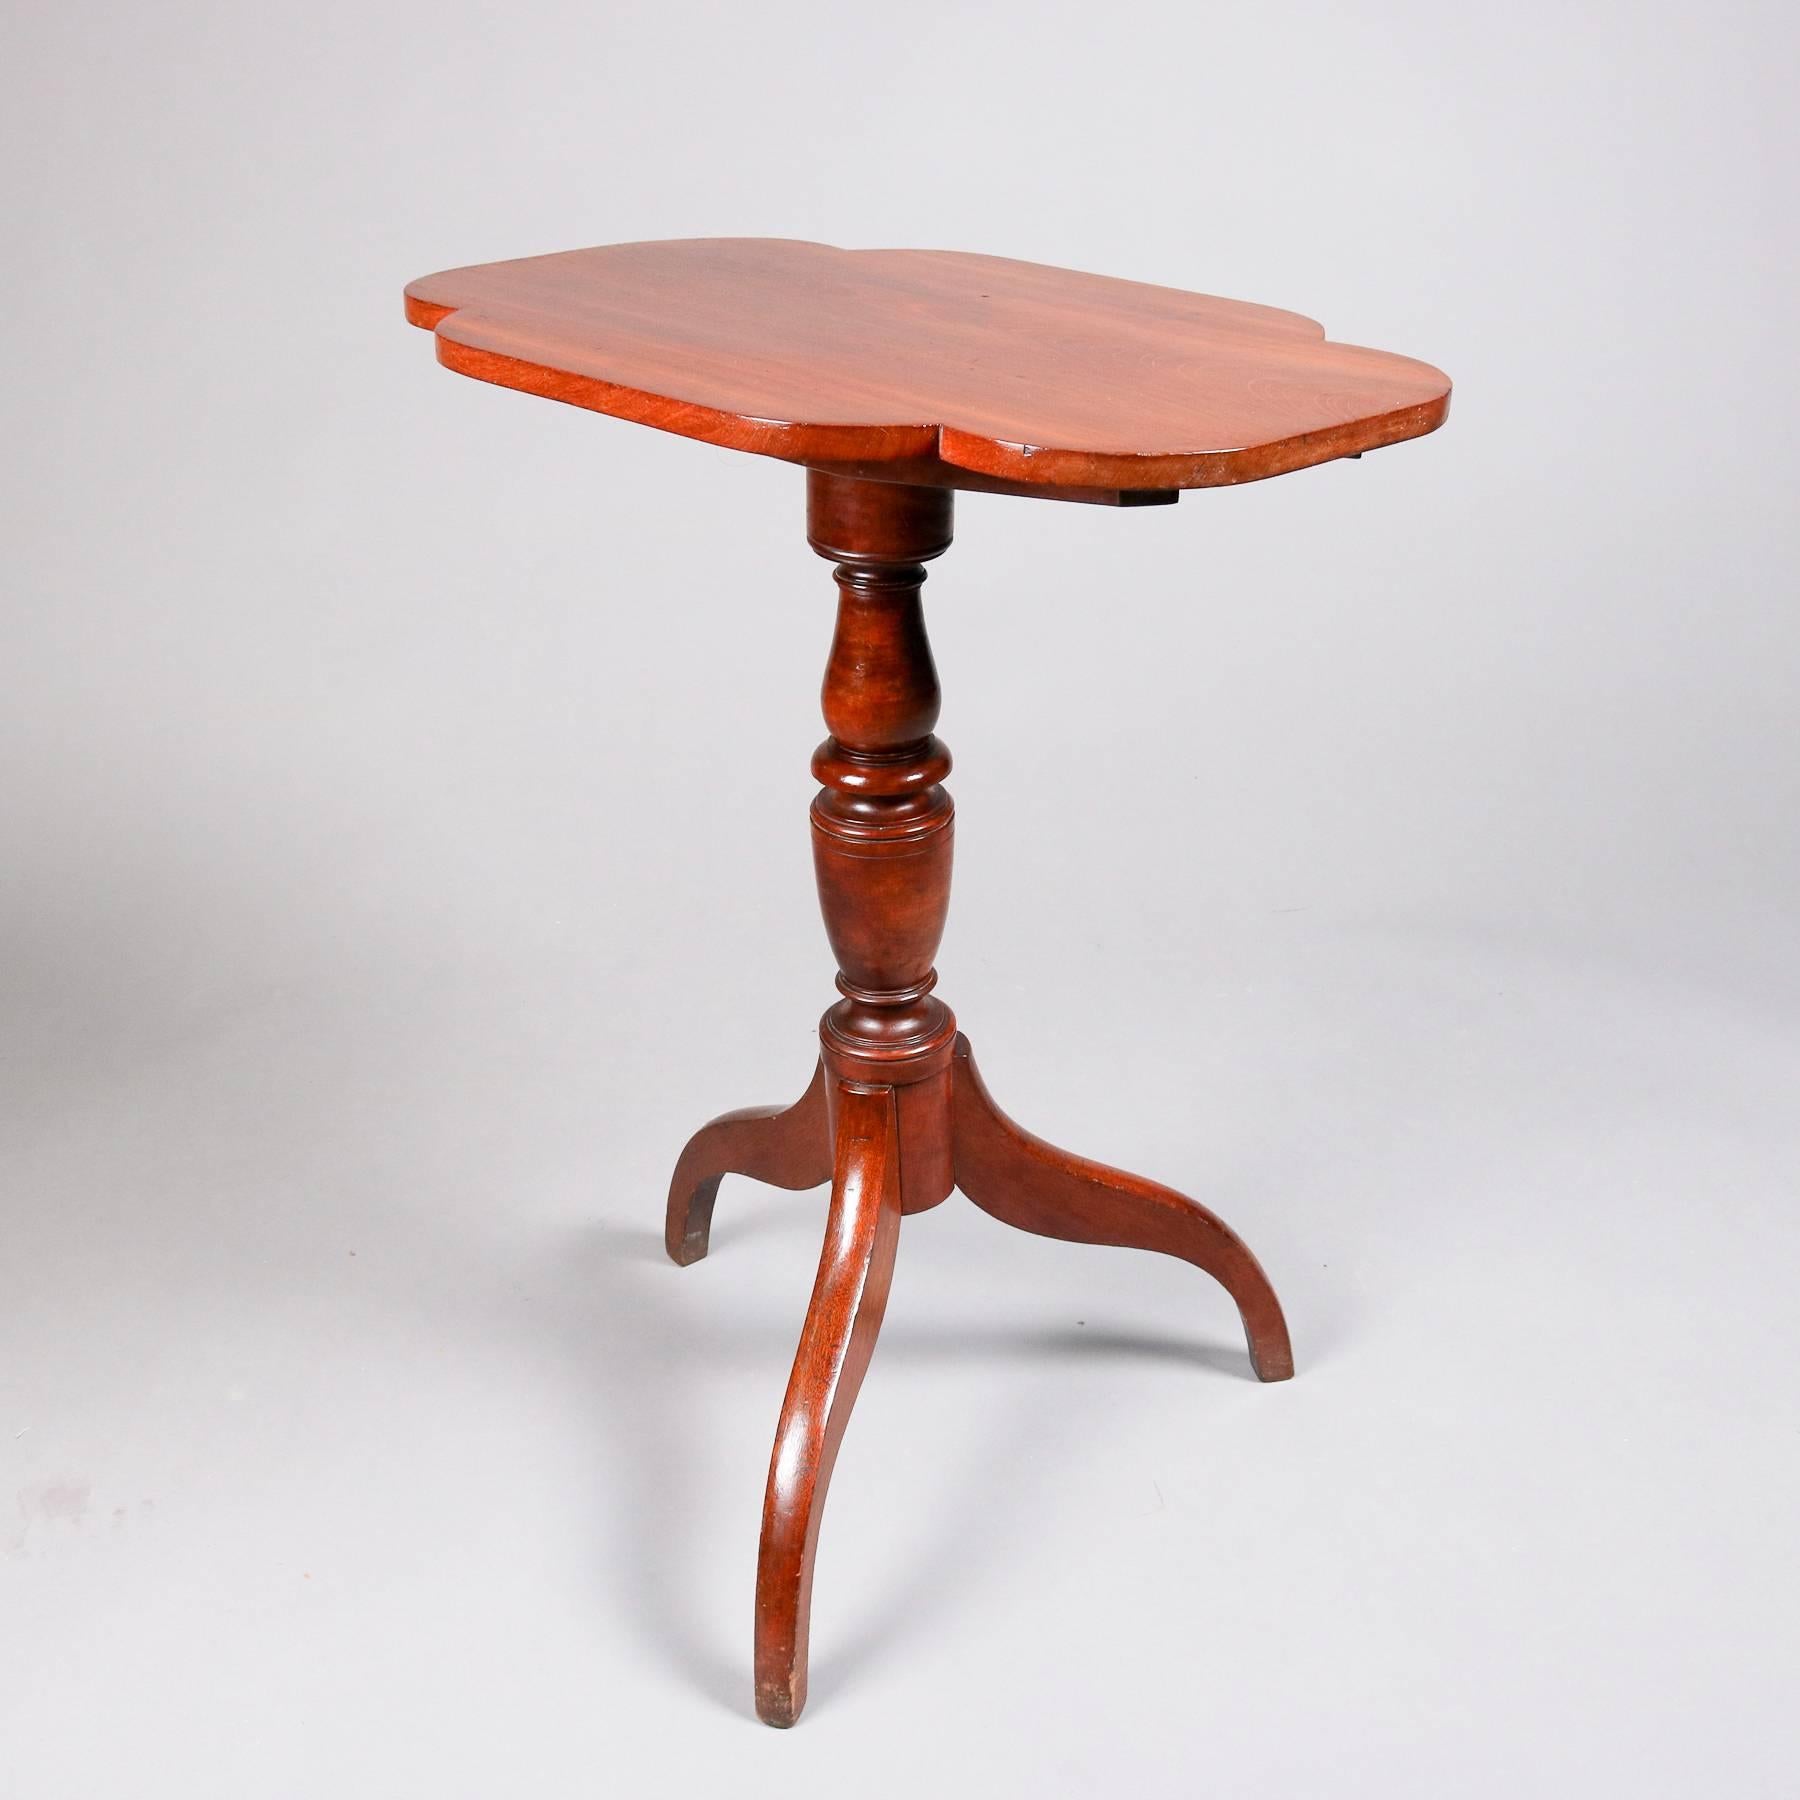 Antique Federal Mahogany Tilt-Top Spider Leg Candle Stand, 19th Century 1